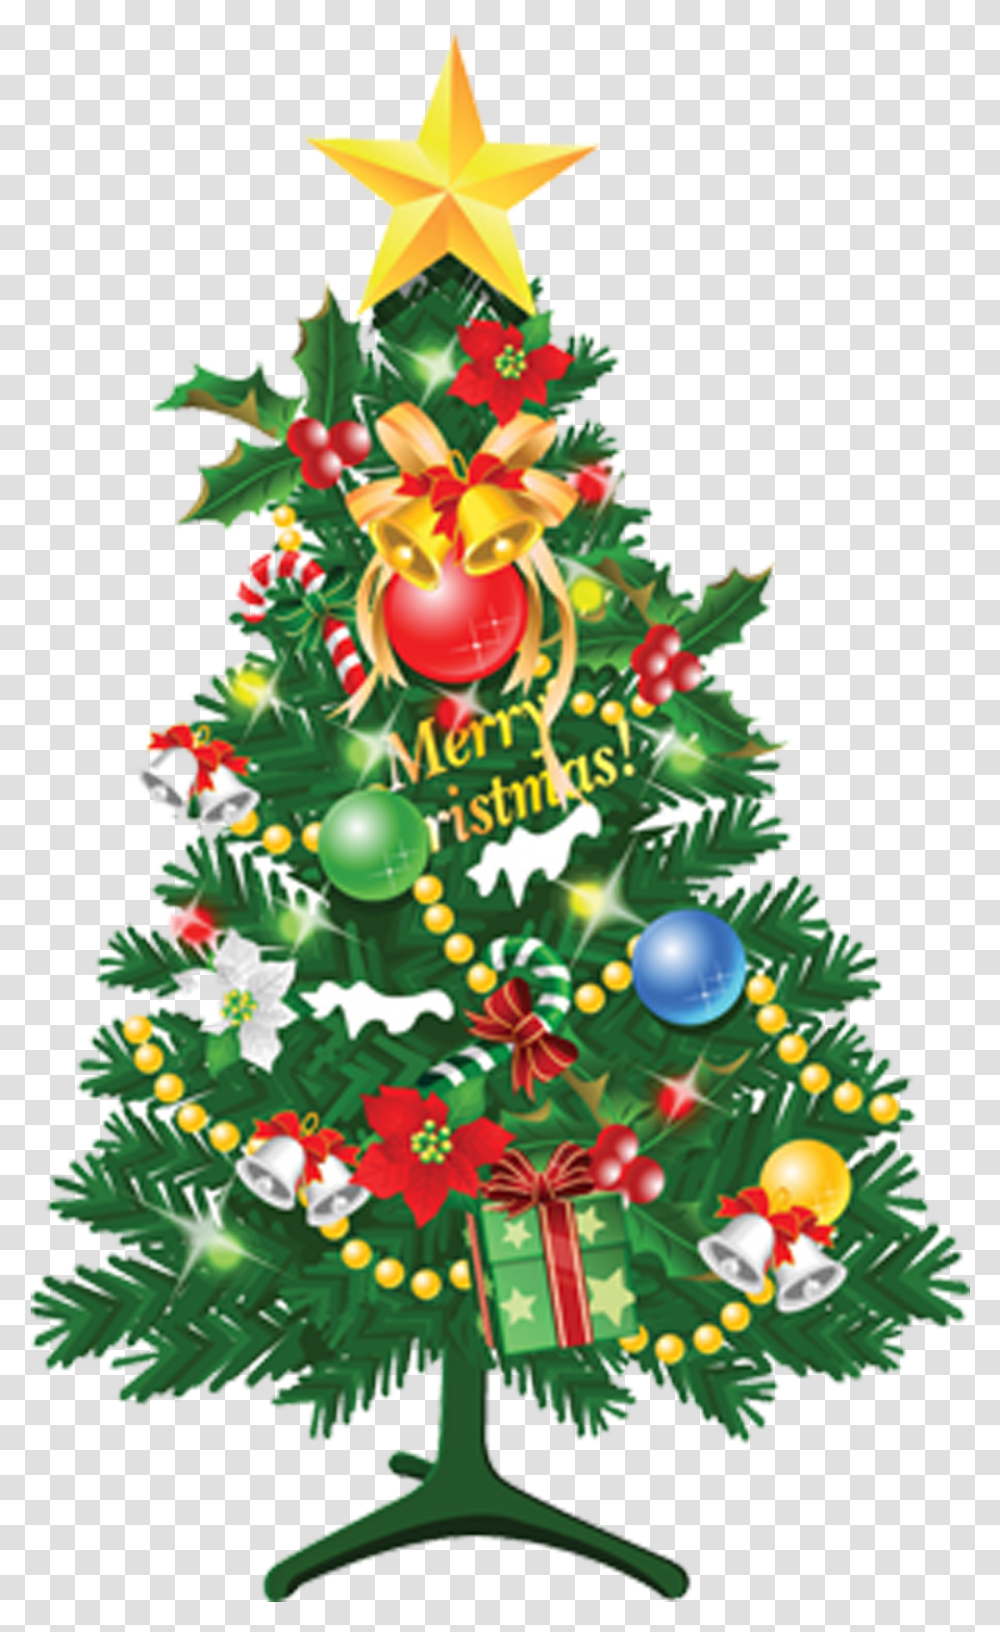 Library Of Free Griswolds Christmas Freeuse Christmas Tree With Candy Canes, Ornament, Plant, Vegetation, Bush Transparent Png